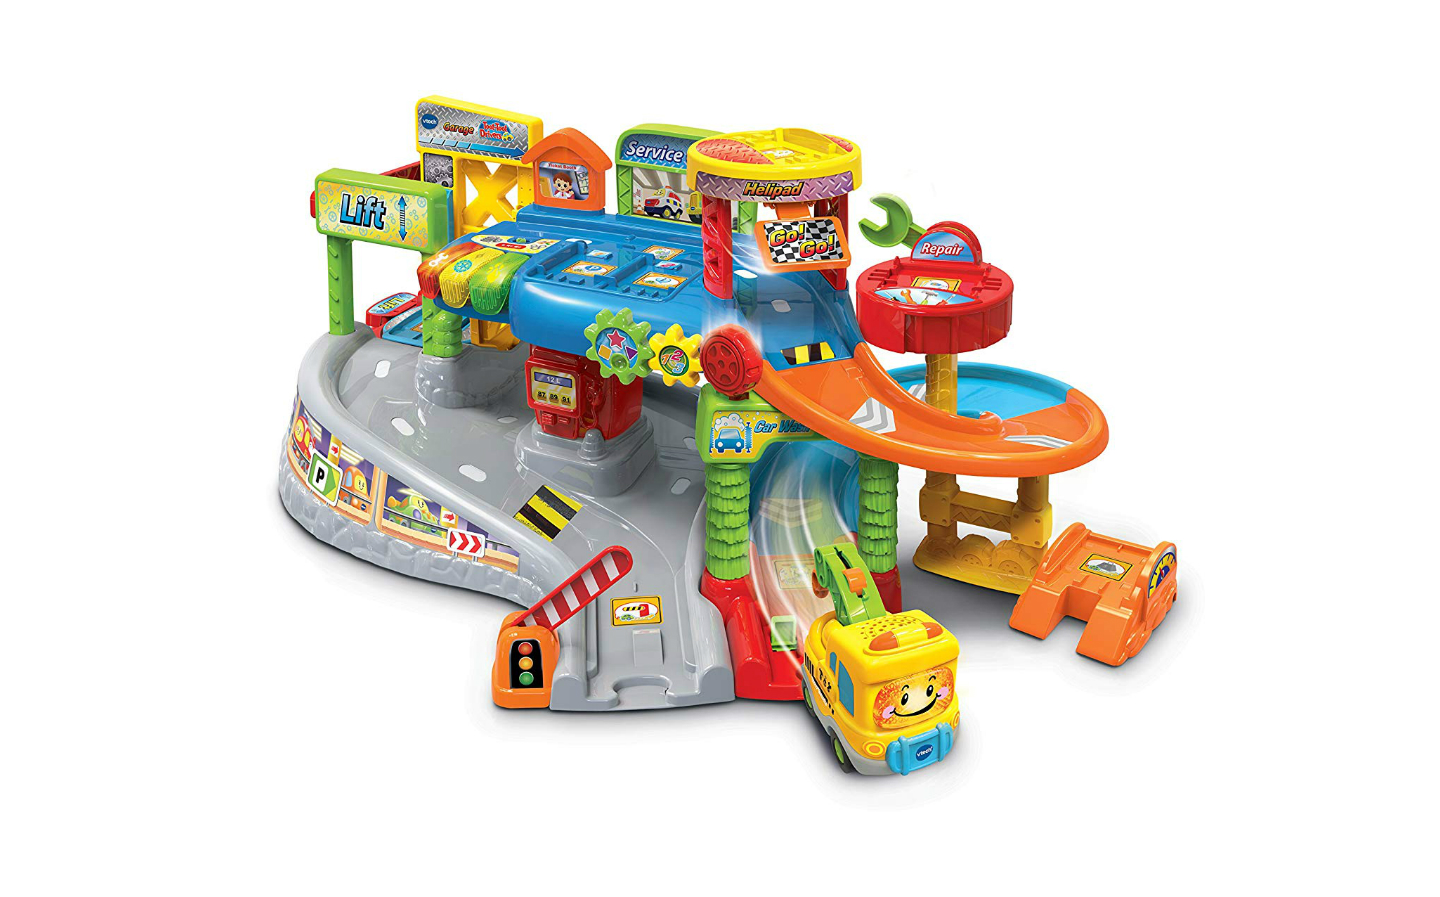 Christmas gift ideas for car fan: Vtech Toot Toot Drivers Garage